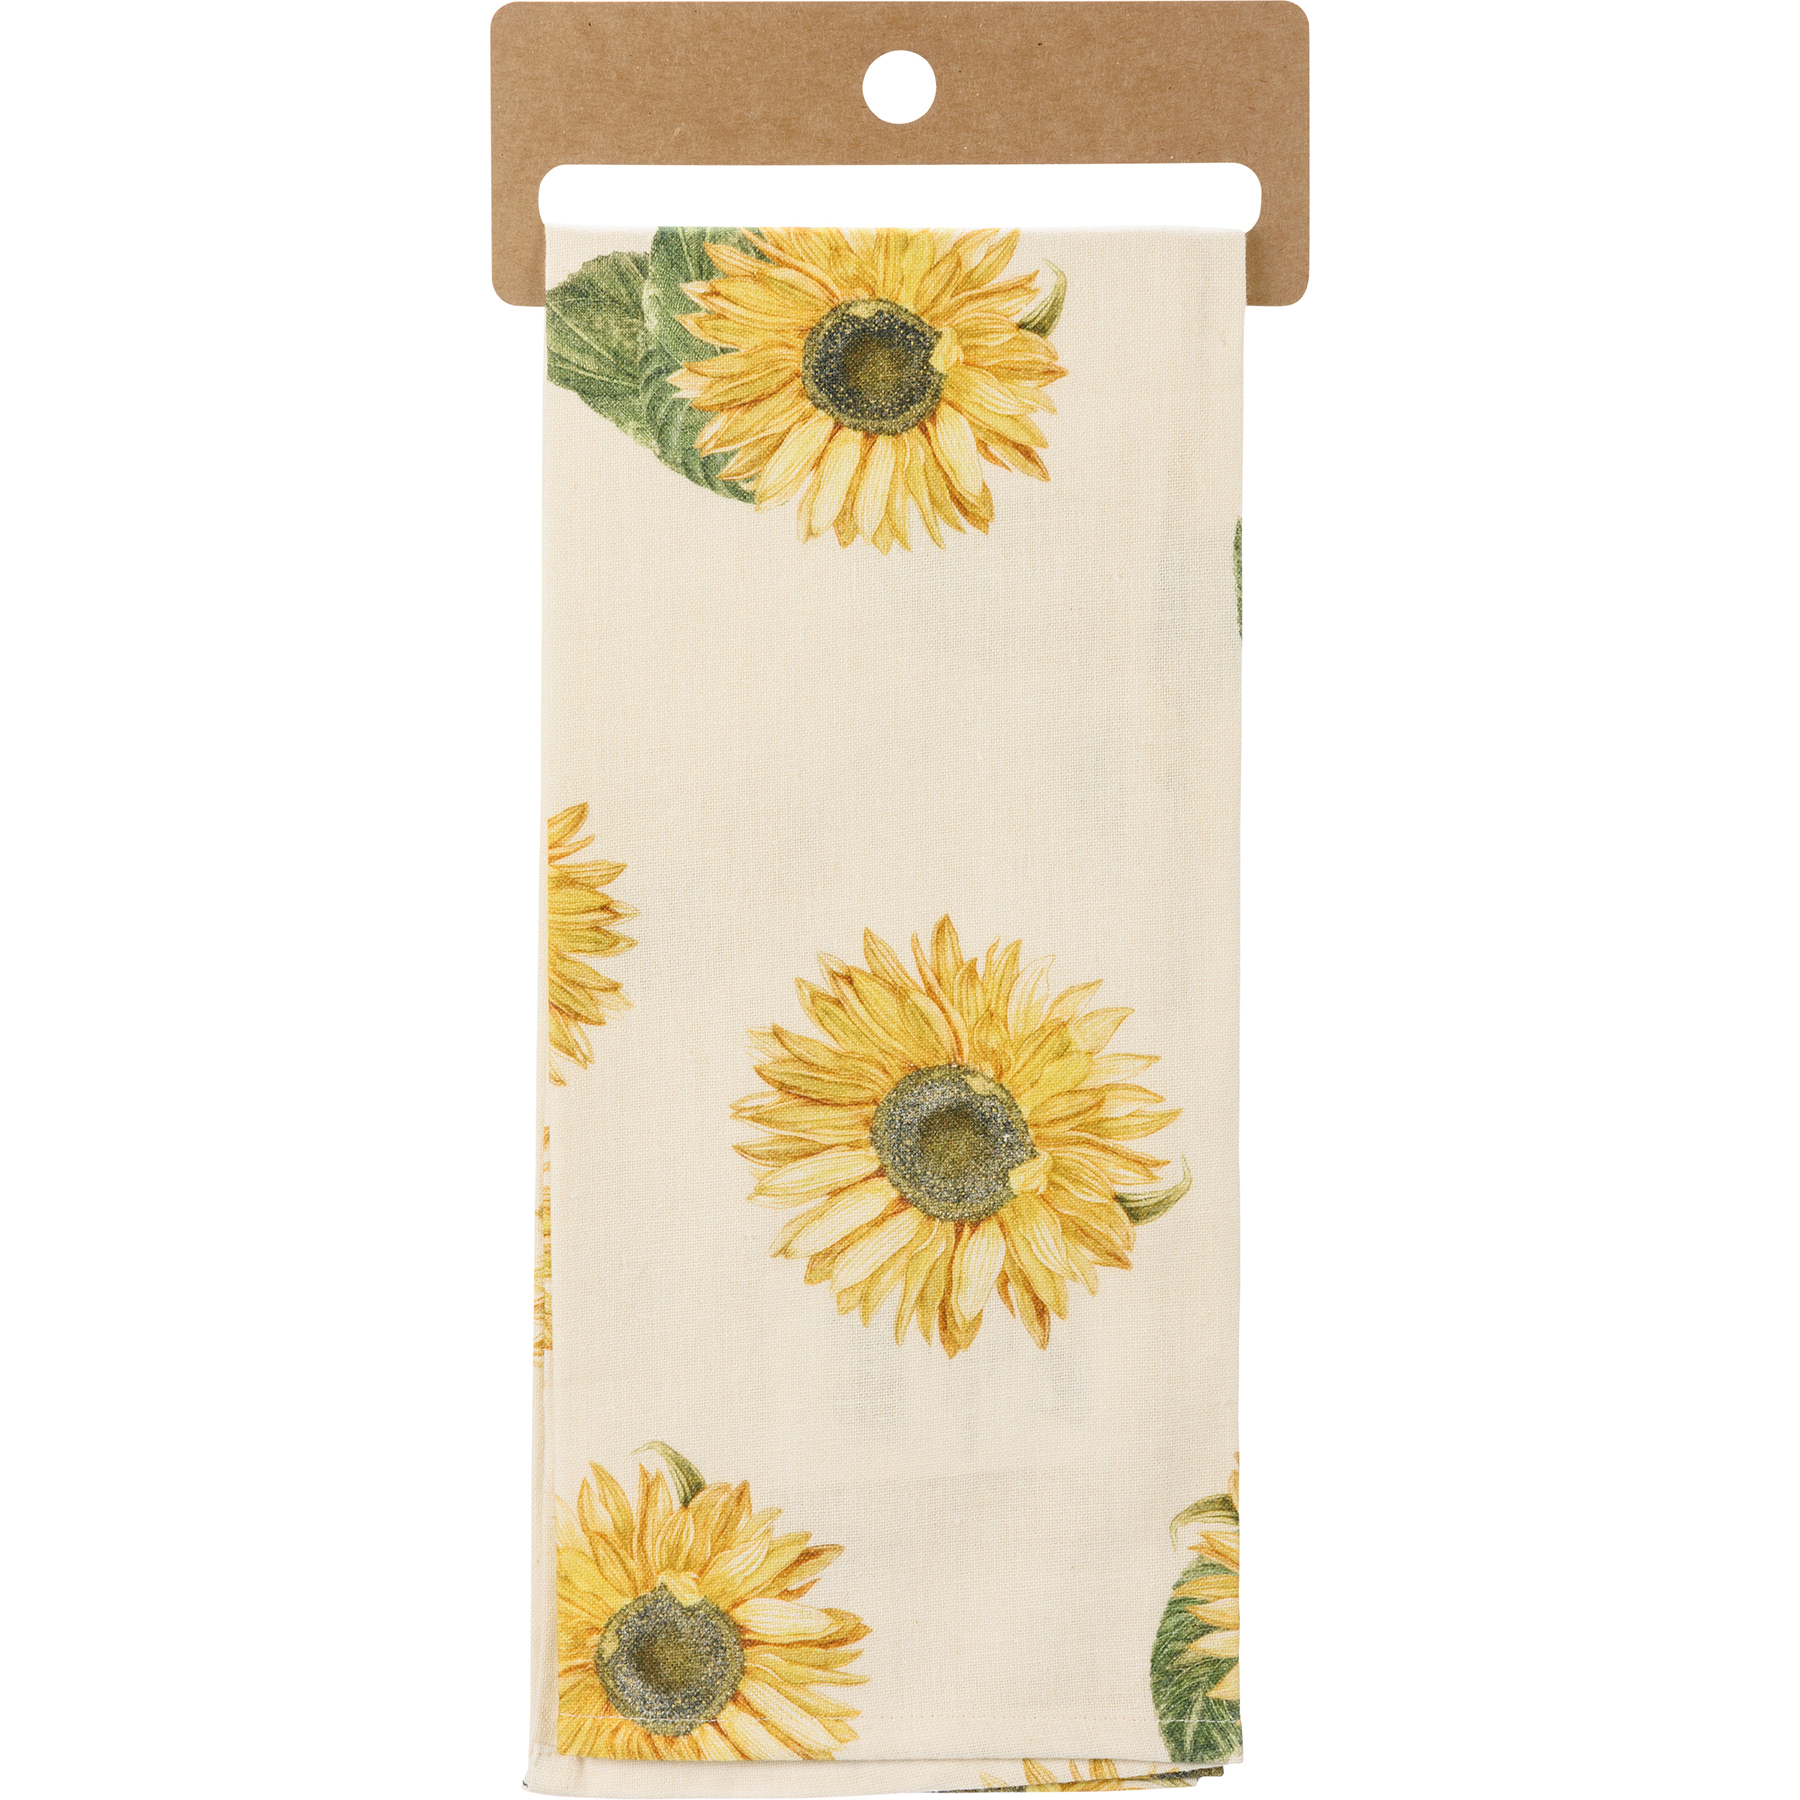 SPXUBZ Kitchen Towels, Yellow Sunflower Flowers for Home Kitchen Decor  Housewarming Gift Towel Set of 2